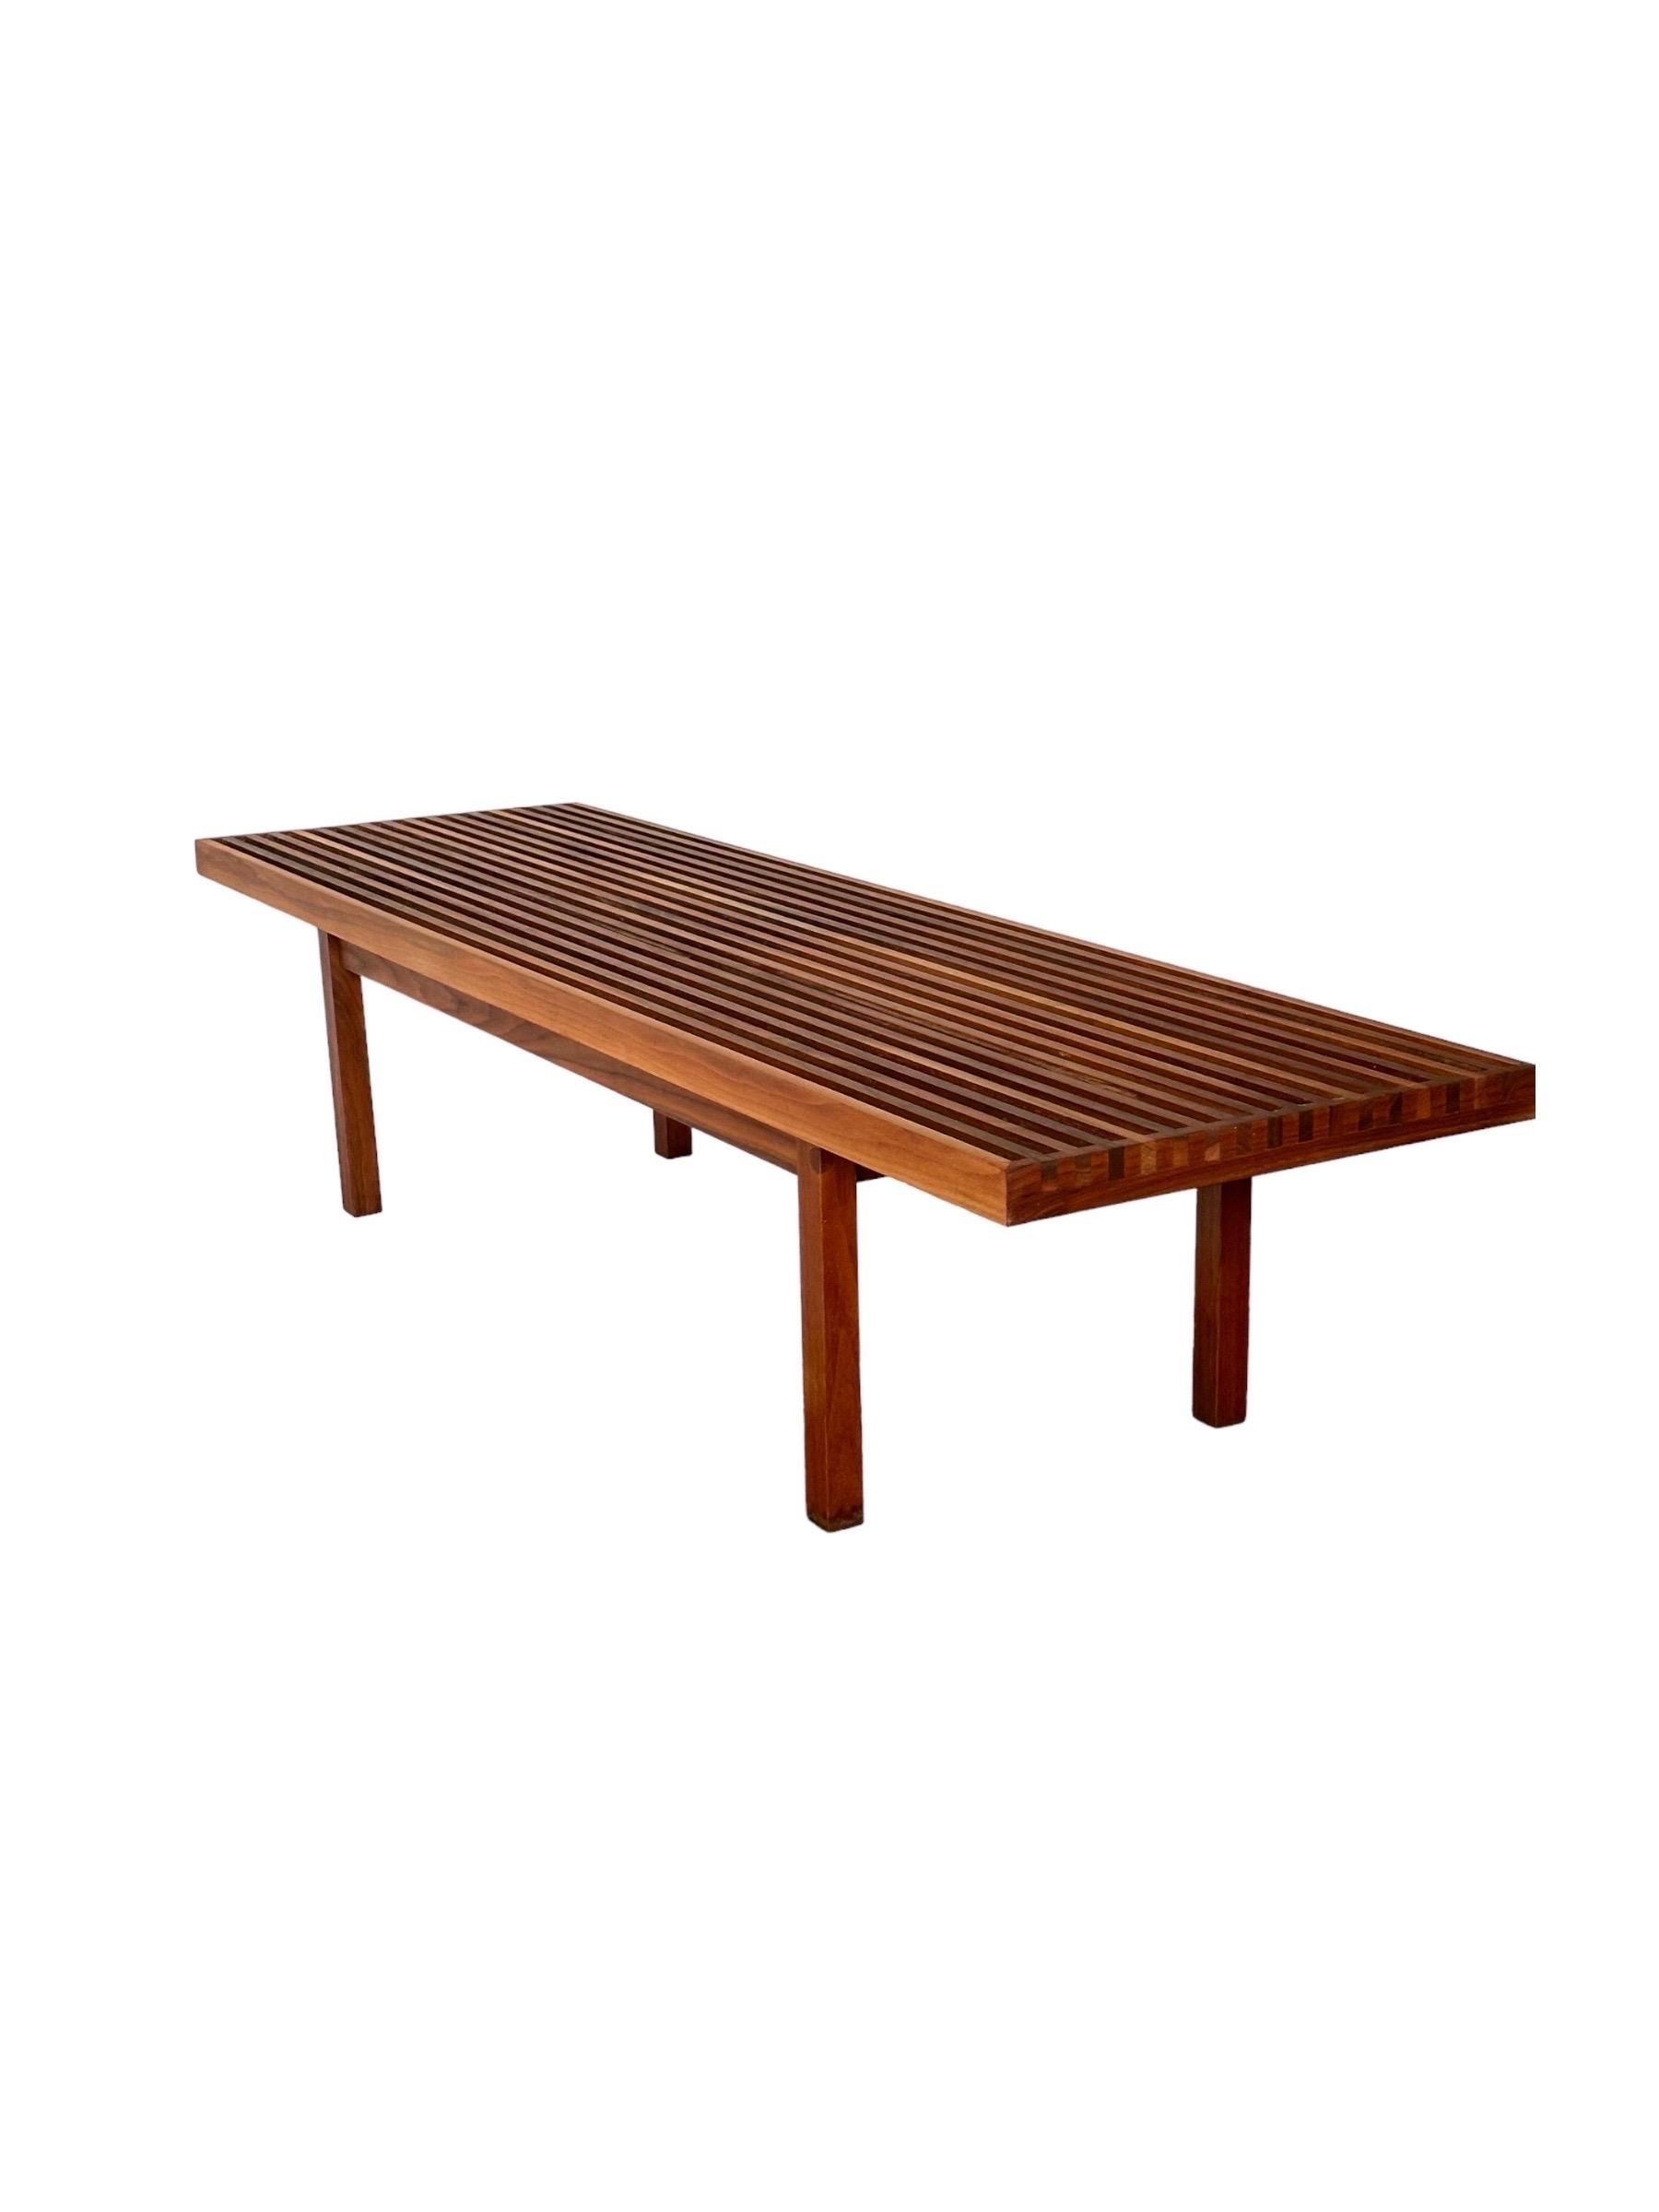 Beautiful Mel Smilow walnut slat bench. Elegant silhouette with simple lines and just the right proportions. Also often used as a coffee table. Top and sides have been sanded and oiled. Warm attractive nuance in color and grain. Measurements: 5’